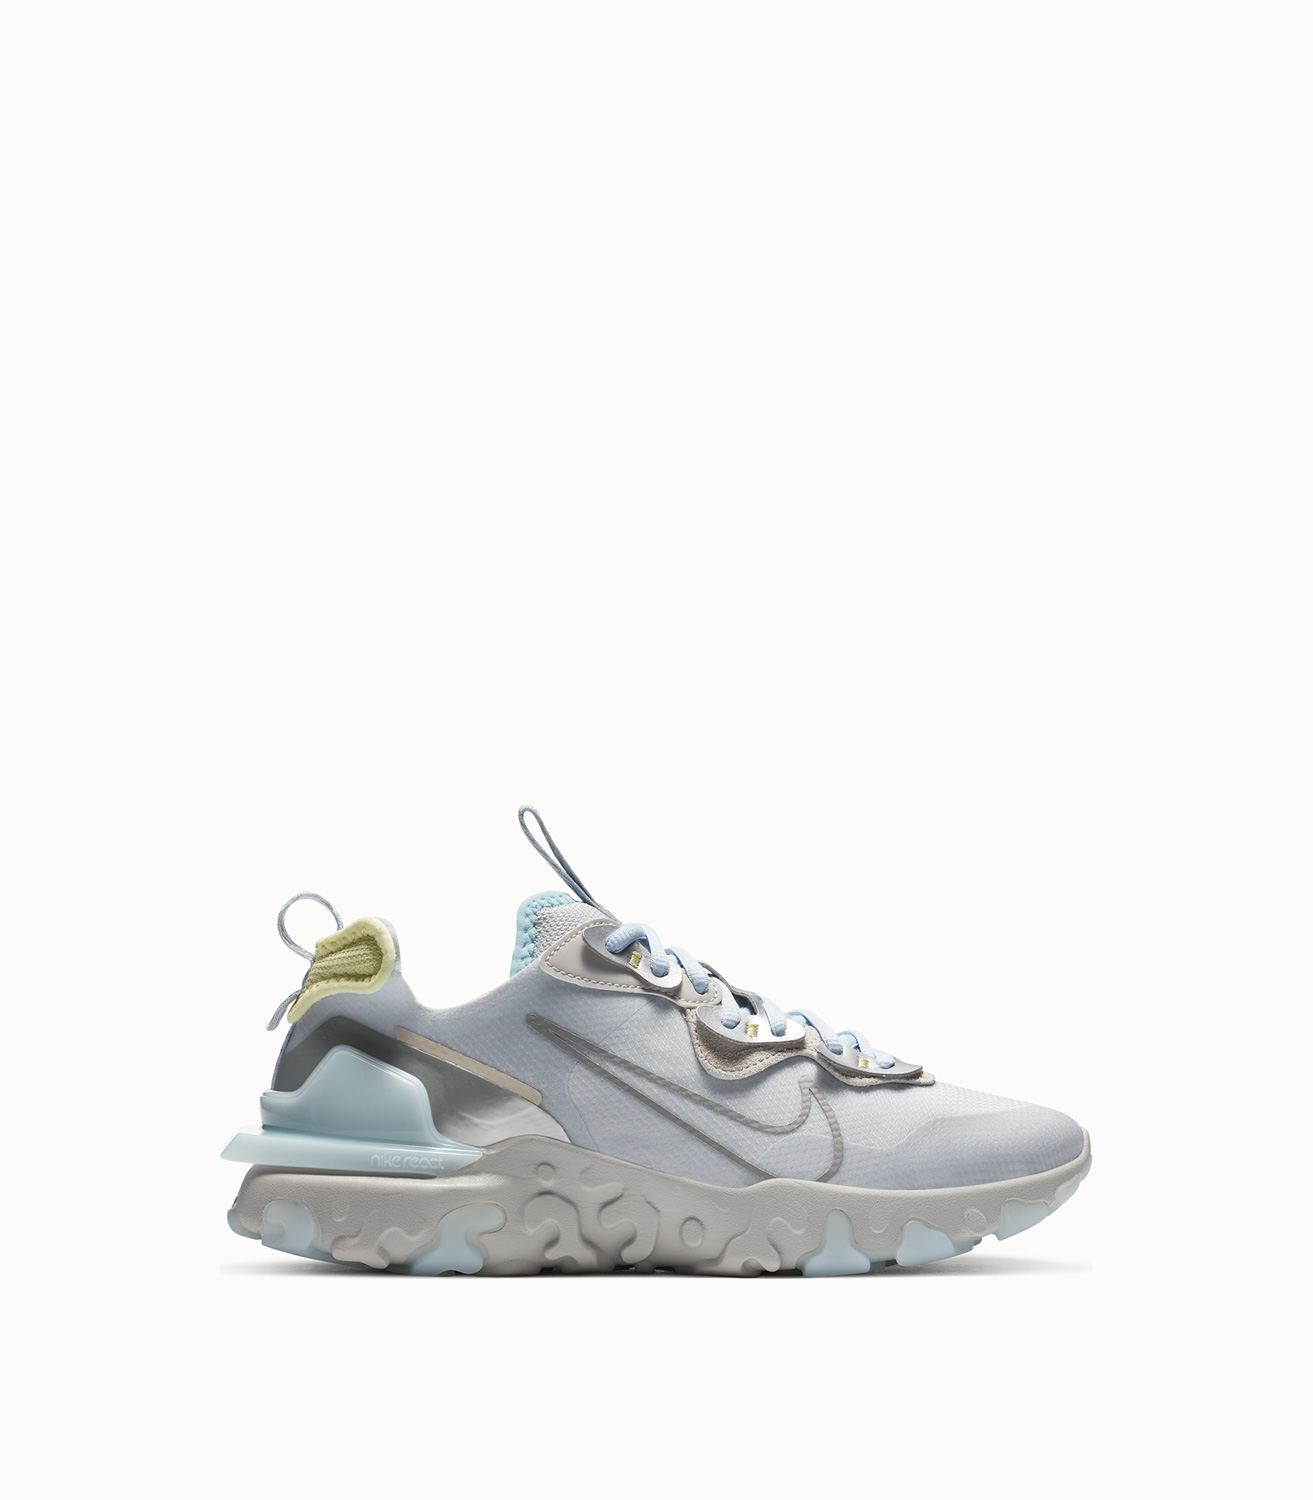 grey and light blue nike shoes